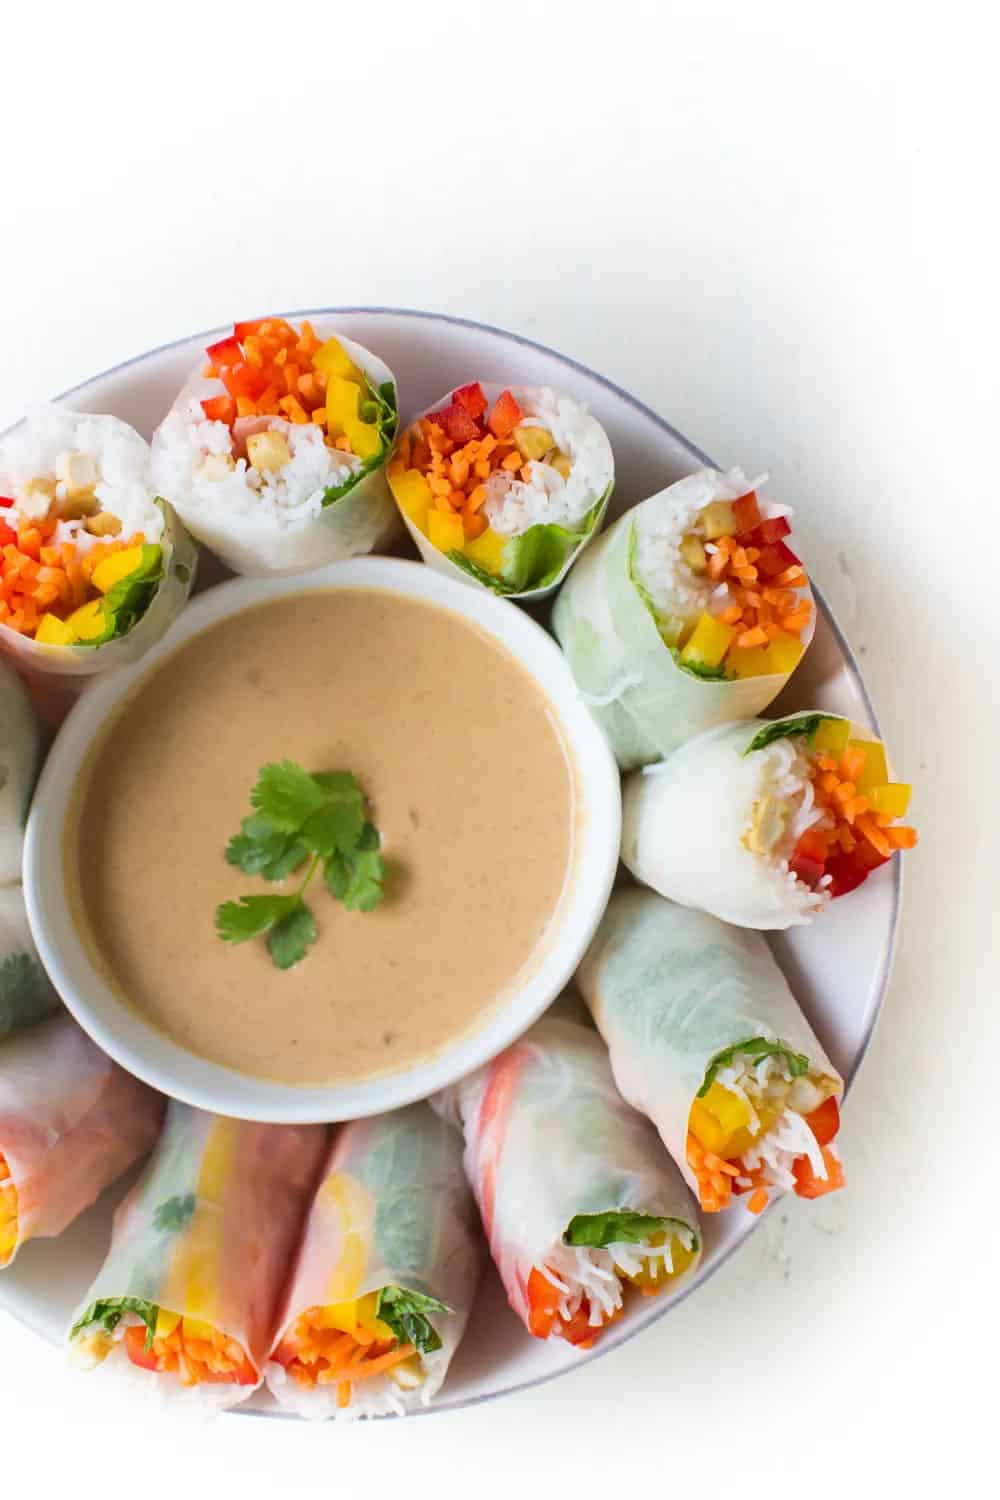 fresh spring rolls filled with tofu, lettuce, red and yellow bell pepper strips, vermicelli noodles, and shredded carrots on a plate with a bowl of peanut sauce in the middle with cilantro garnish